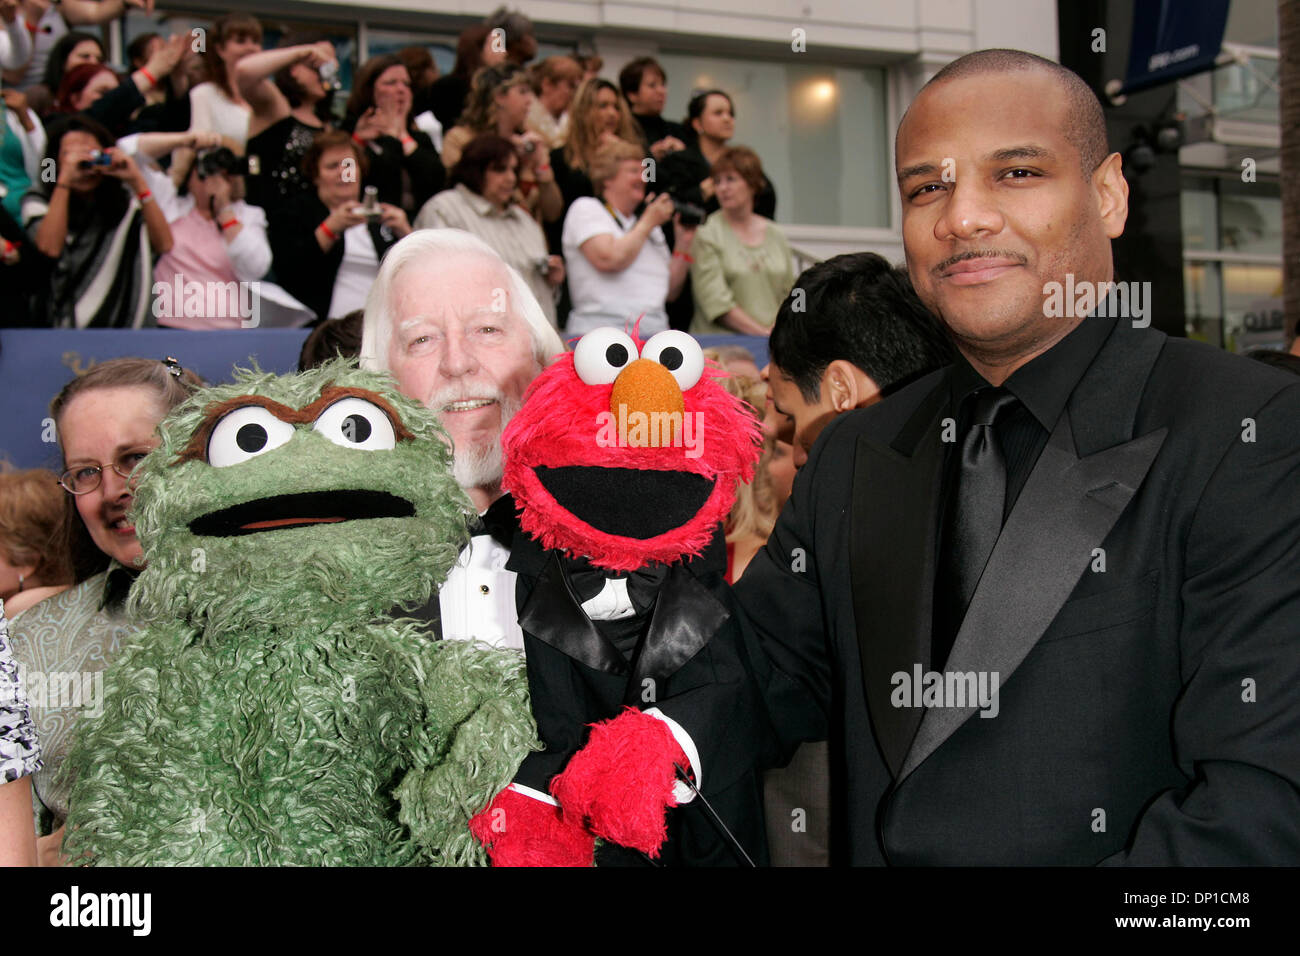 Apr 28, 2006; Hollywood, CA, USA; KEVIN CLASH, CARROLL & ELMO at the 2006 Daytime Emmy Awards held at the Kodak Theatre. Mandatory Credit: Photo by Lisa O'Connor/ZUMA Press. (©) Copyright 2006 by Lisa O'Connor Stock Photo